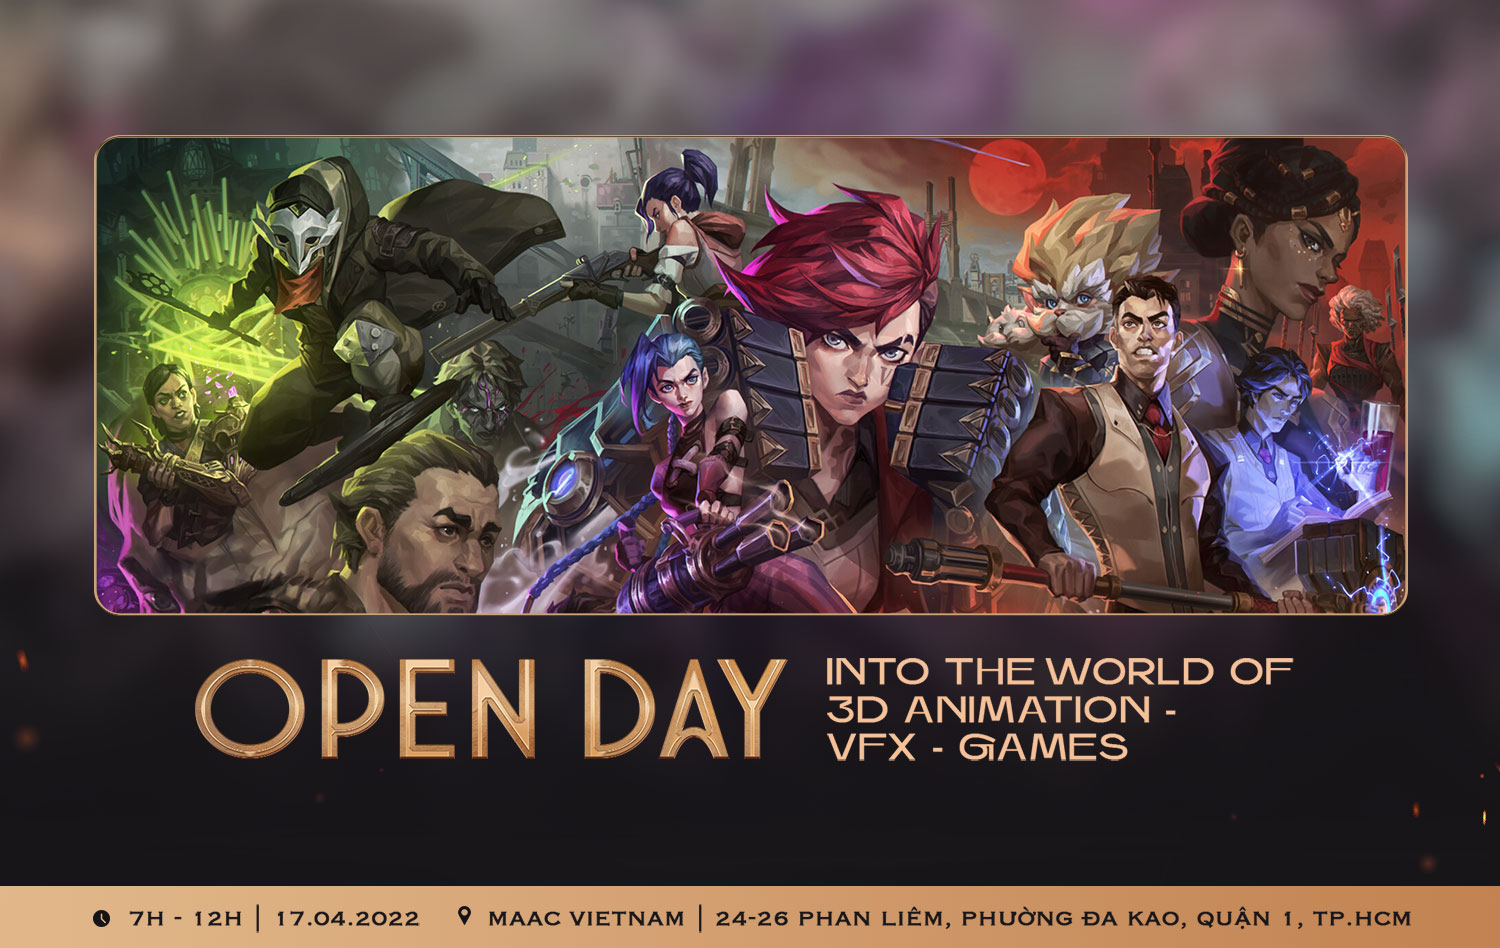 thumb-maac-open-day-2022-into-the-world-of-vfx-3d-animation-games